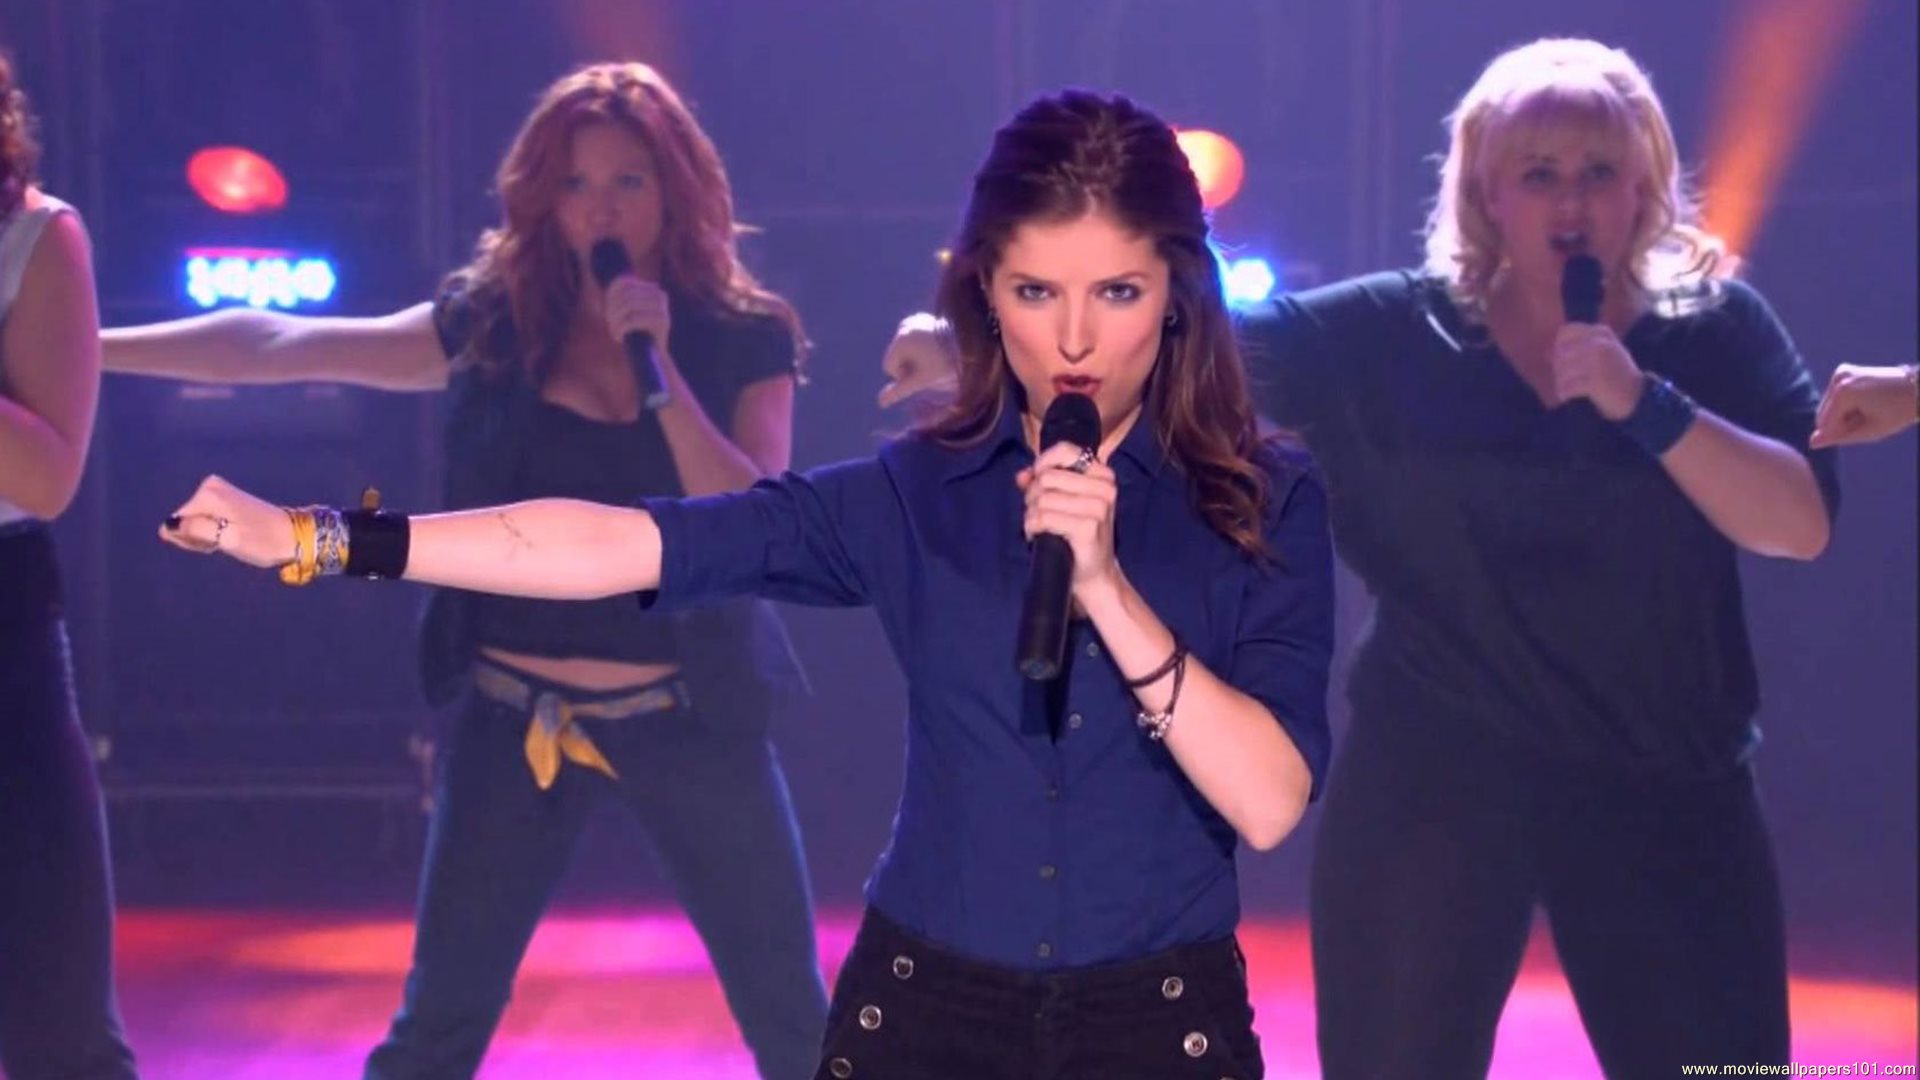 Download Pitch Perfect 2 Movie 2015 Trailer HD Wallpaper Search more